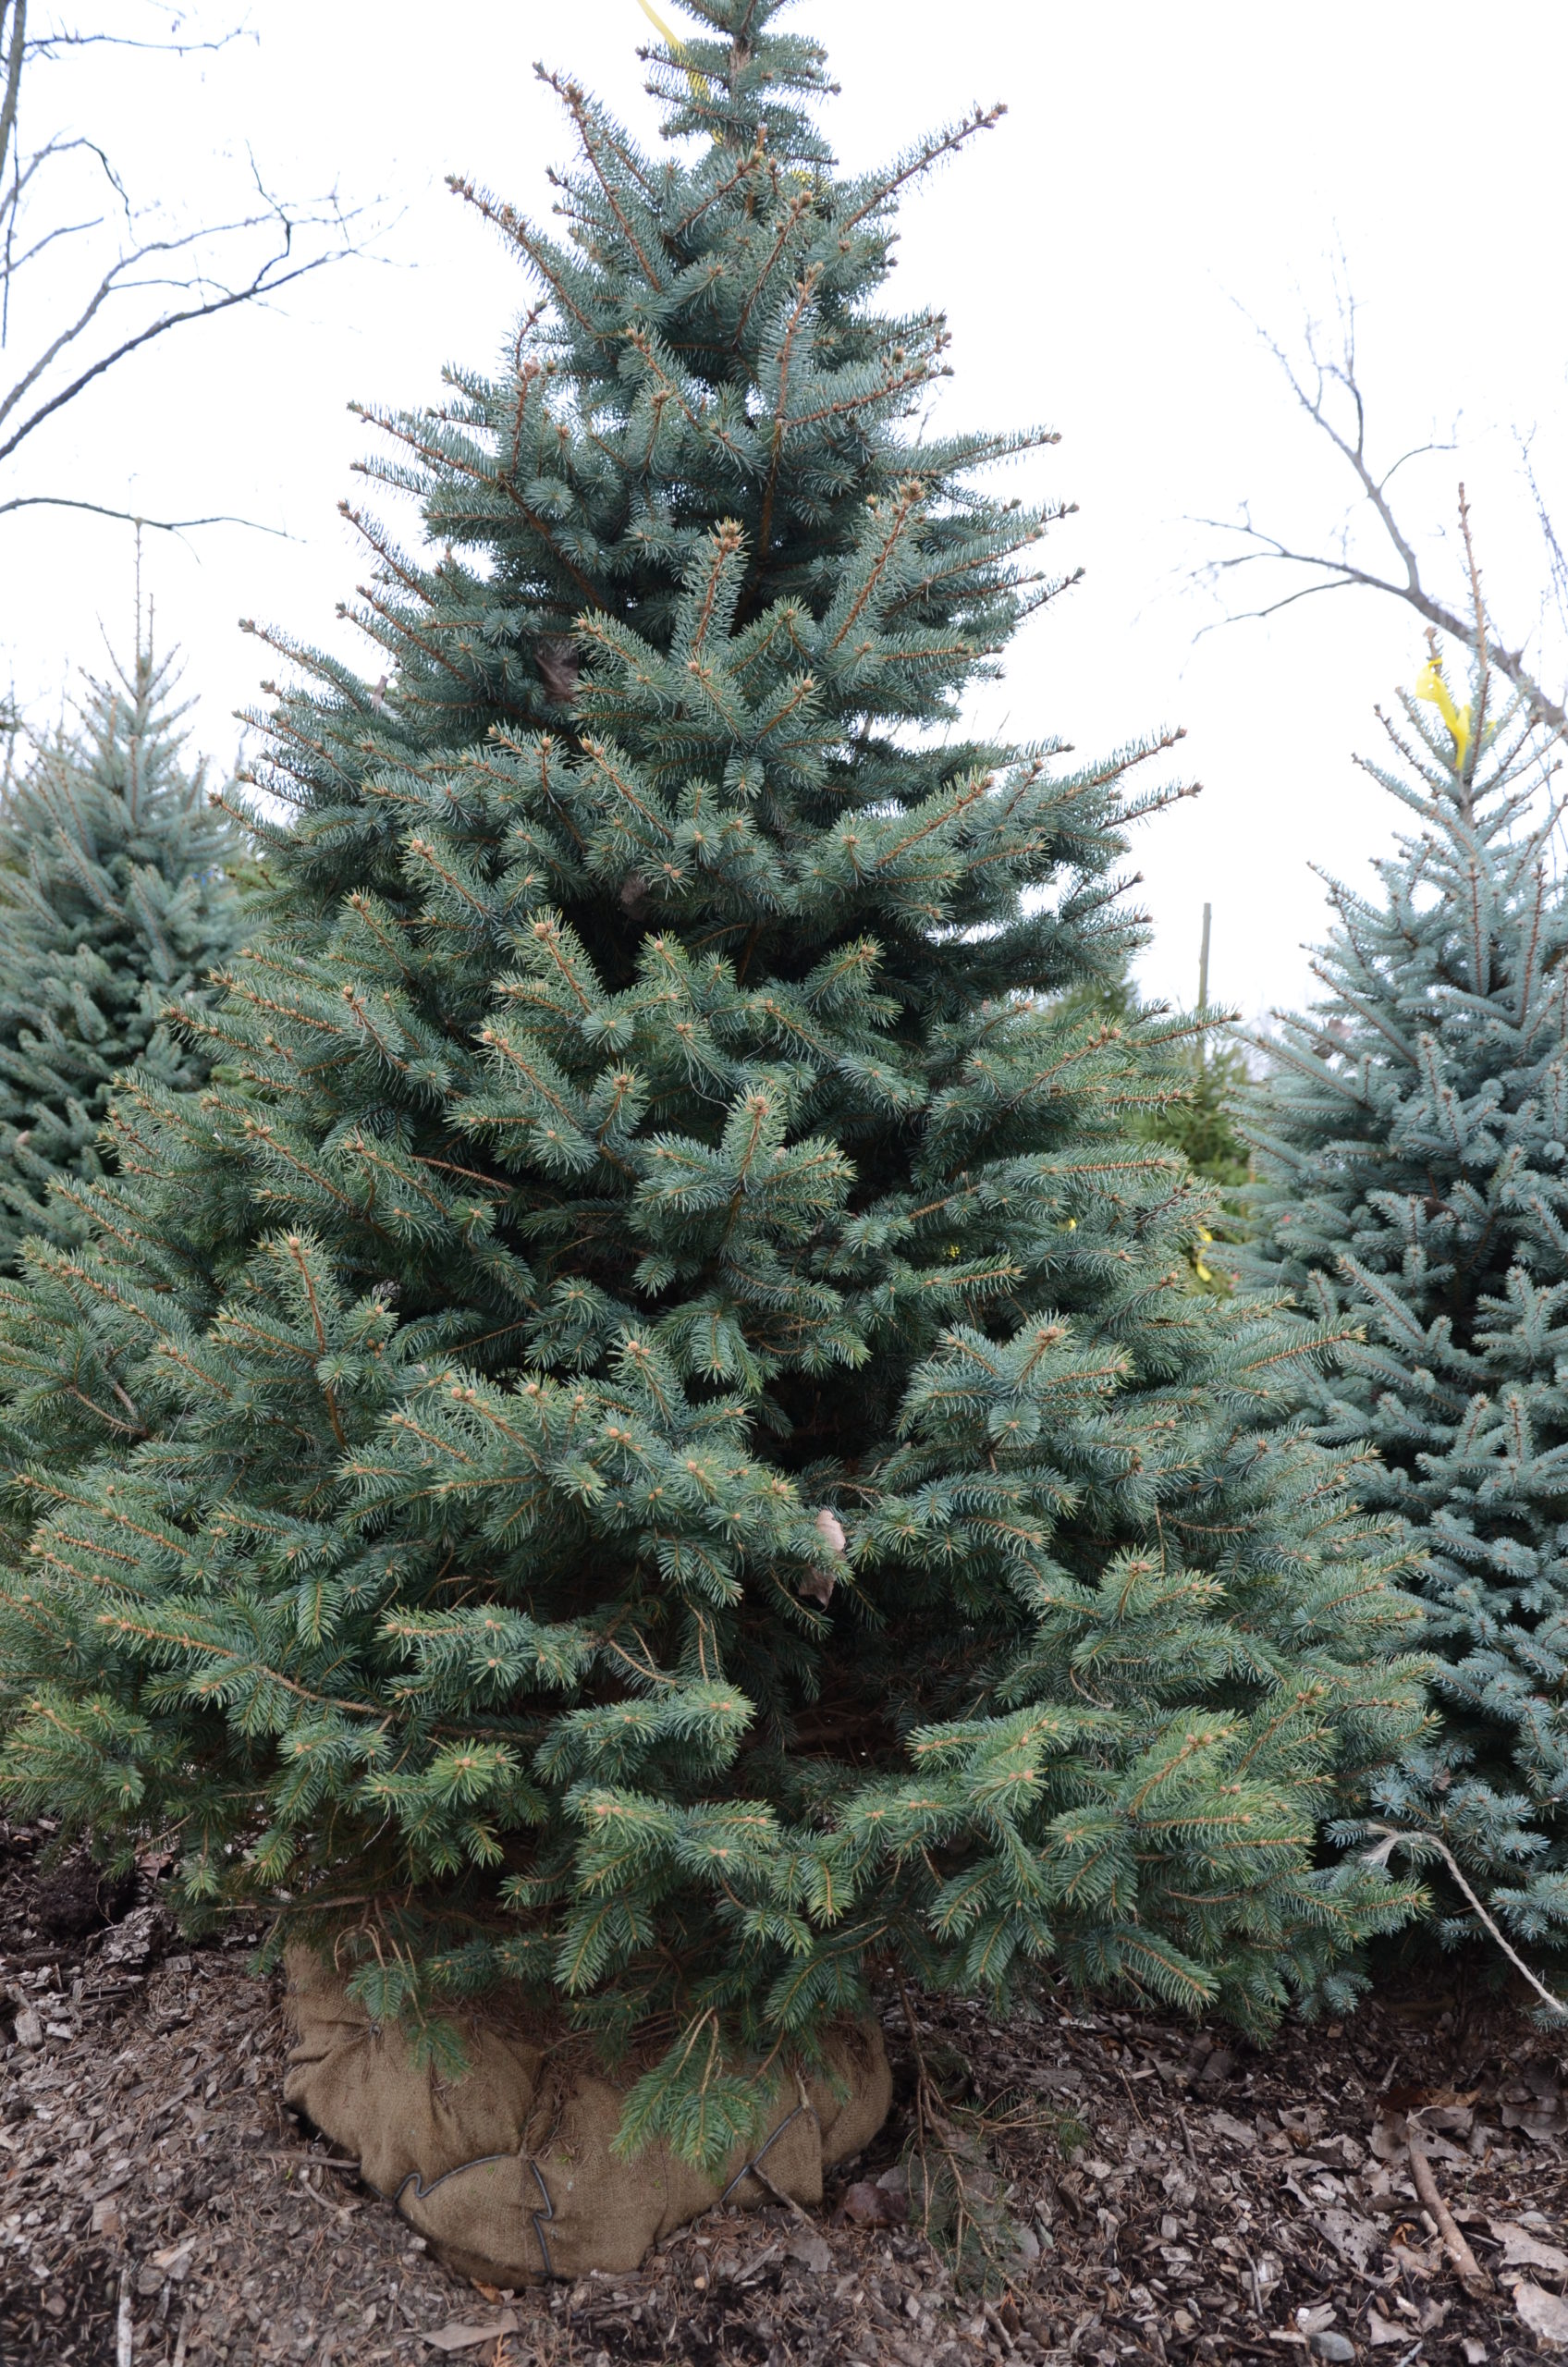 Blue spruce. Not often found as a Christmas tree but they are available as balled and burlapped trees. Blue spruces are not as common as other spruces on the East End as salt spray can wash out their bluish hue.